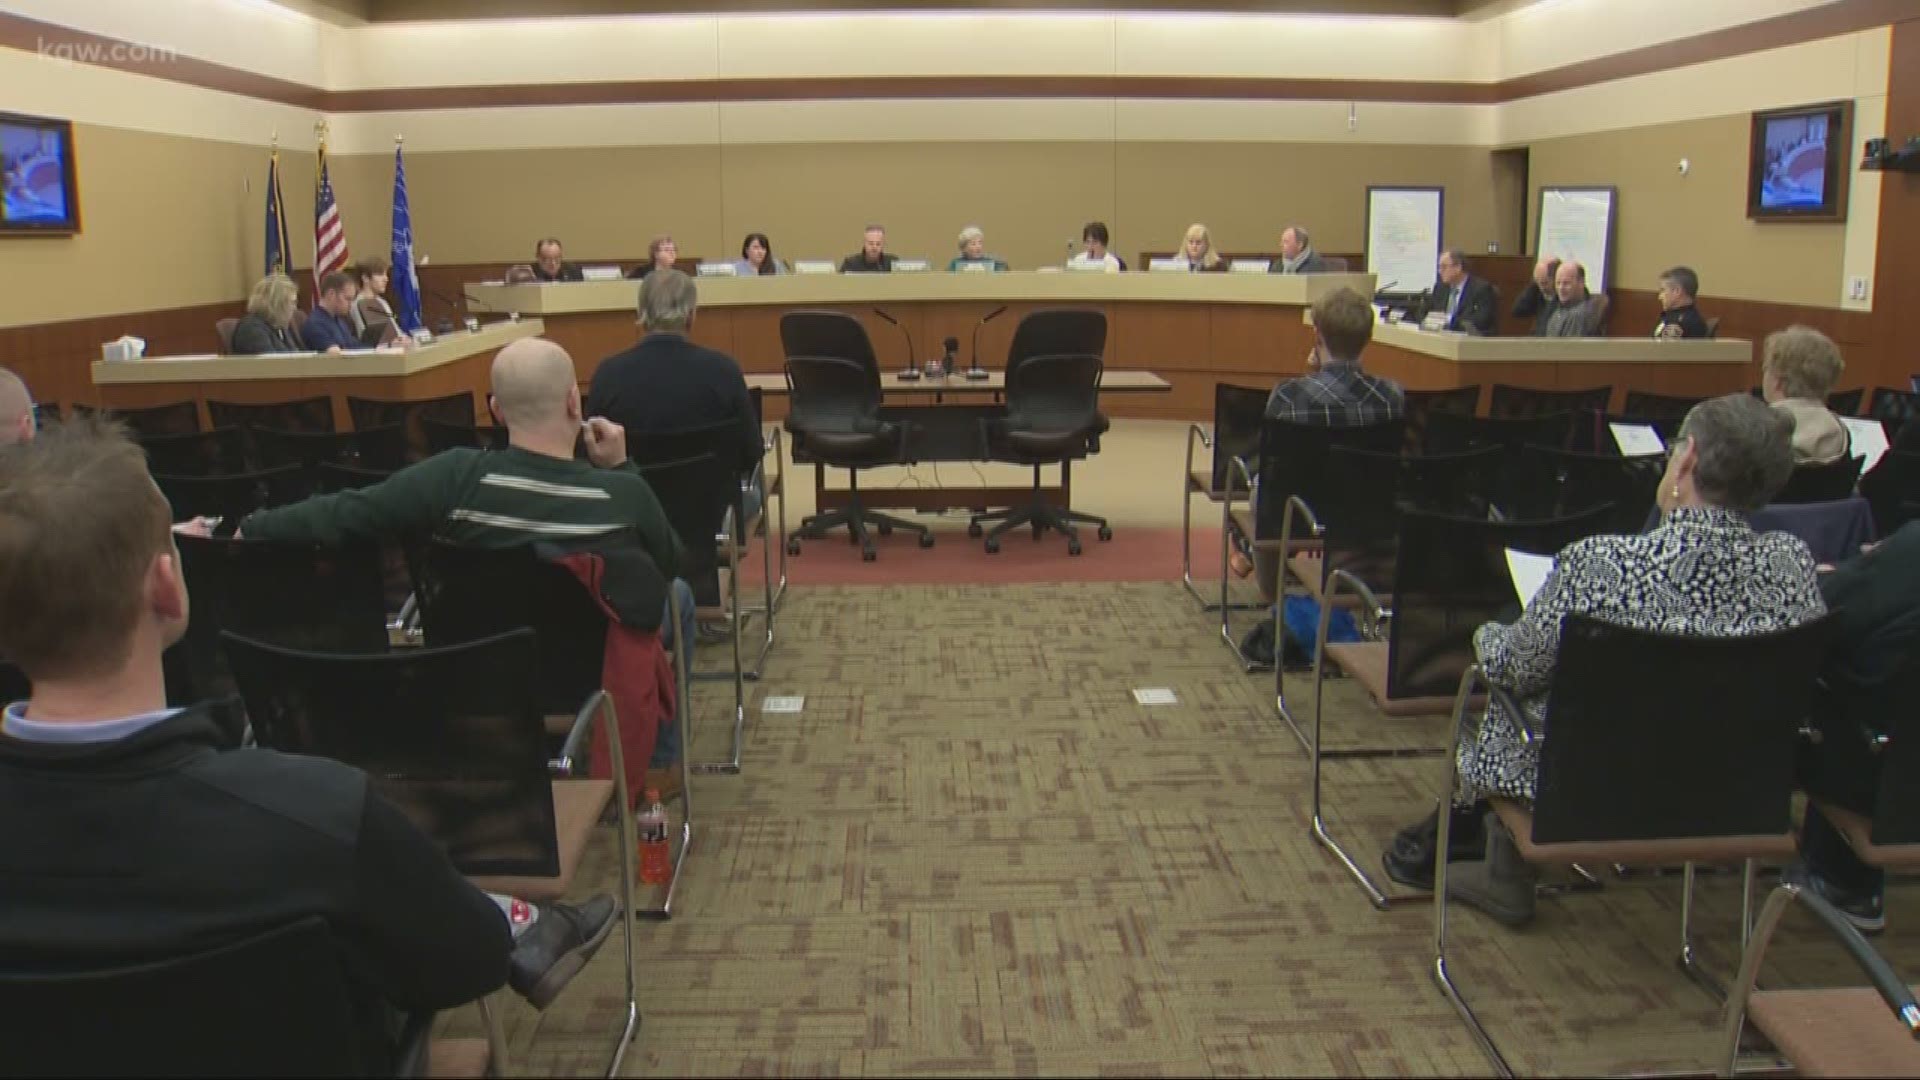 The Keizer City Council voted unanimously to adopt an ordinance banning camping on sidewalks and public property.